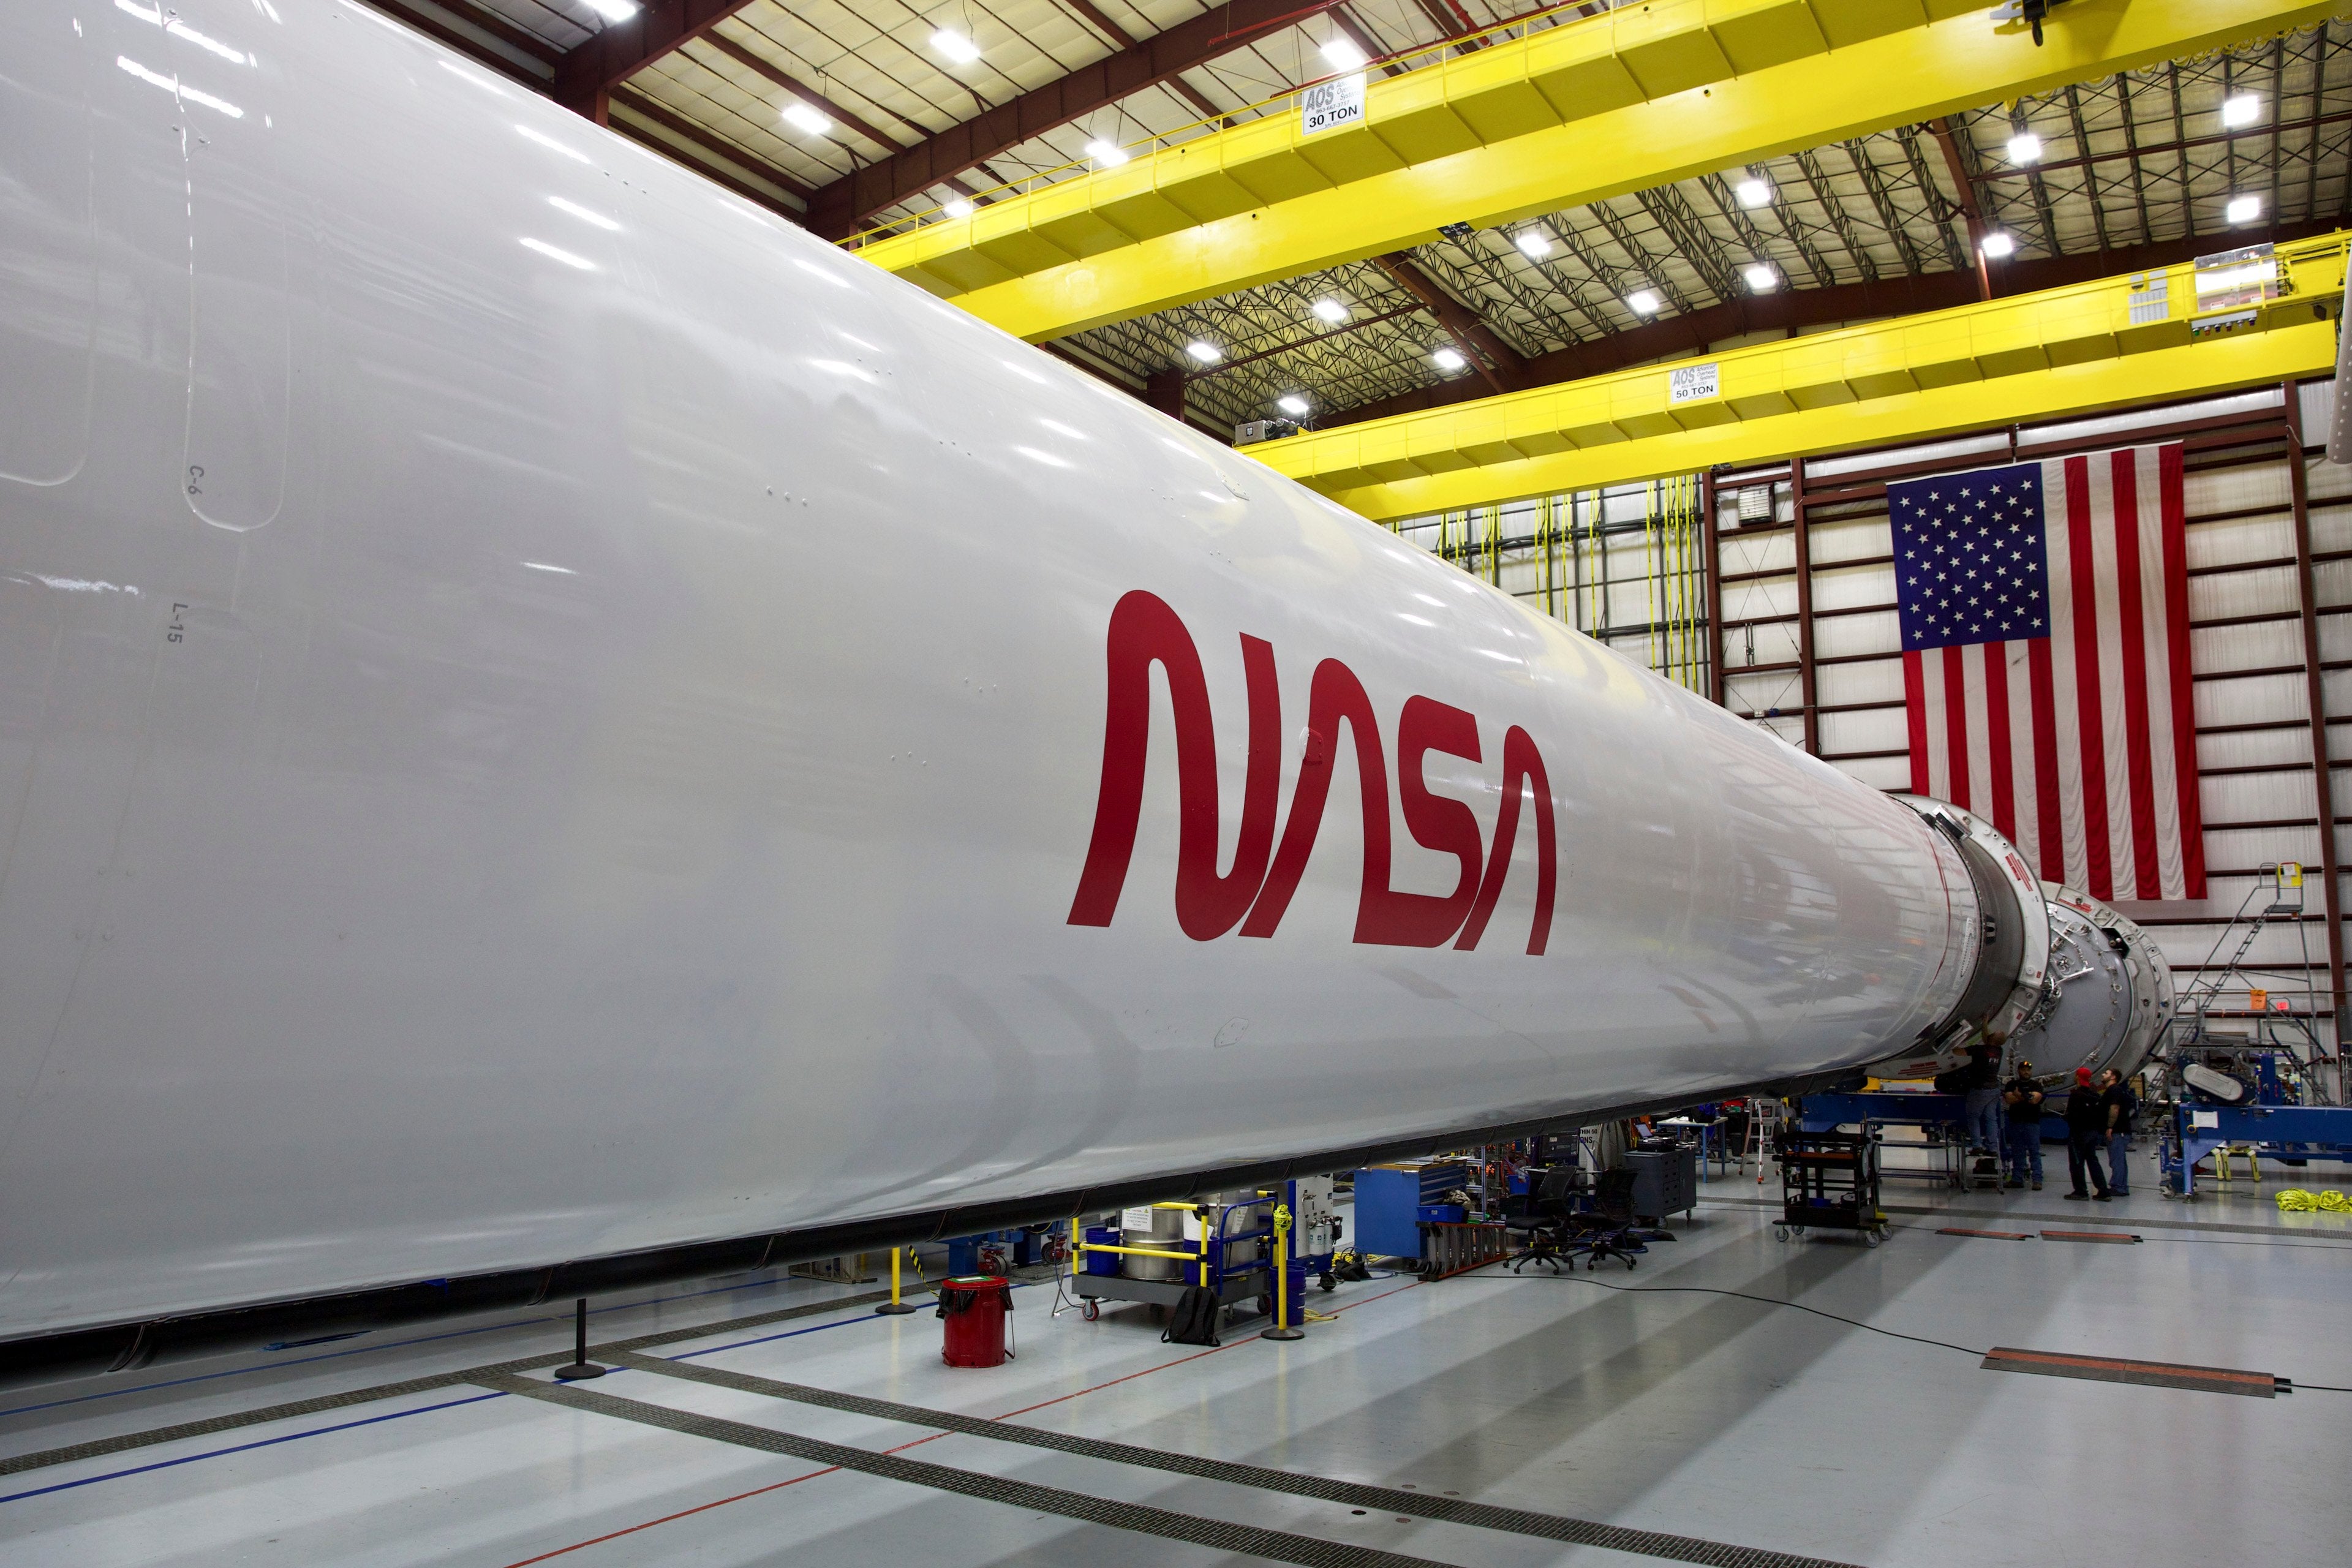 SpaceX adds retro NASA logo to Falcon 9 that will launch Dragon on its first crewed flight